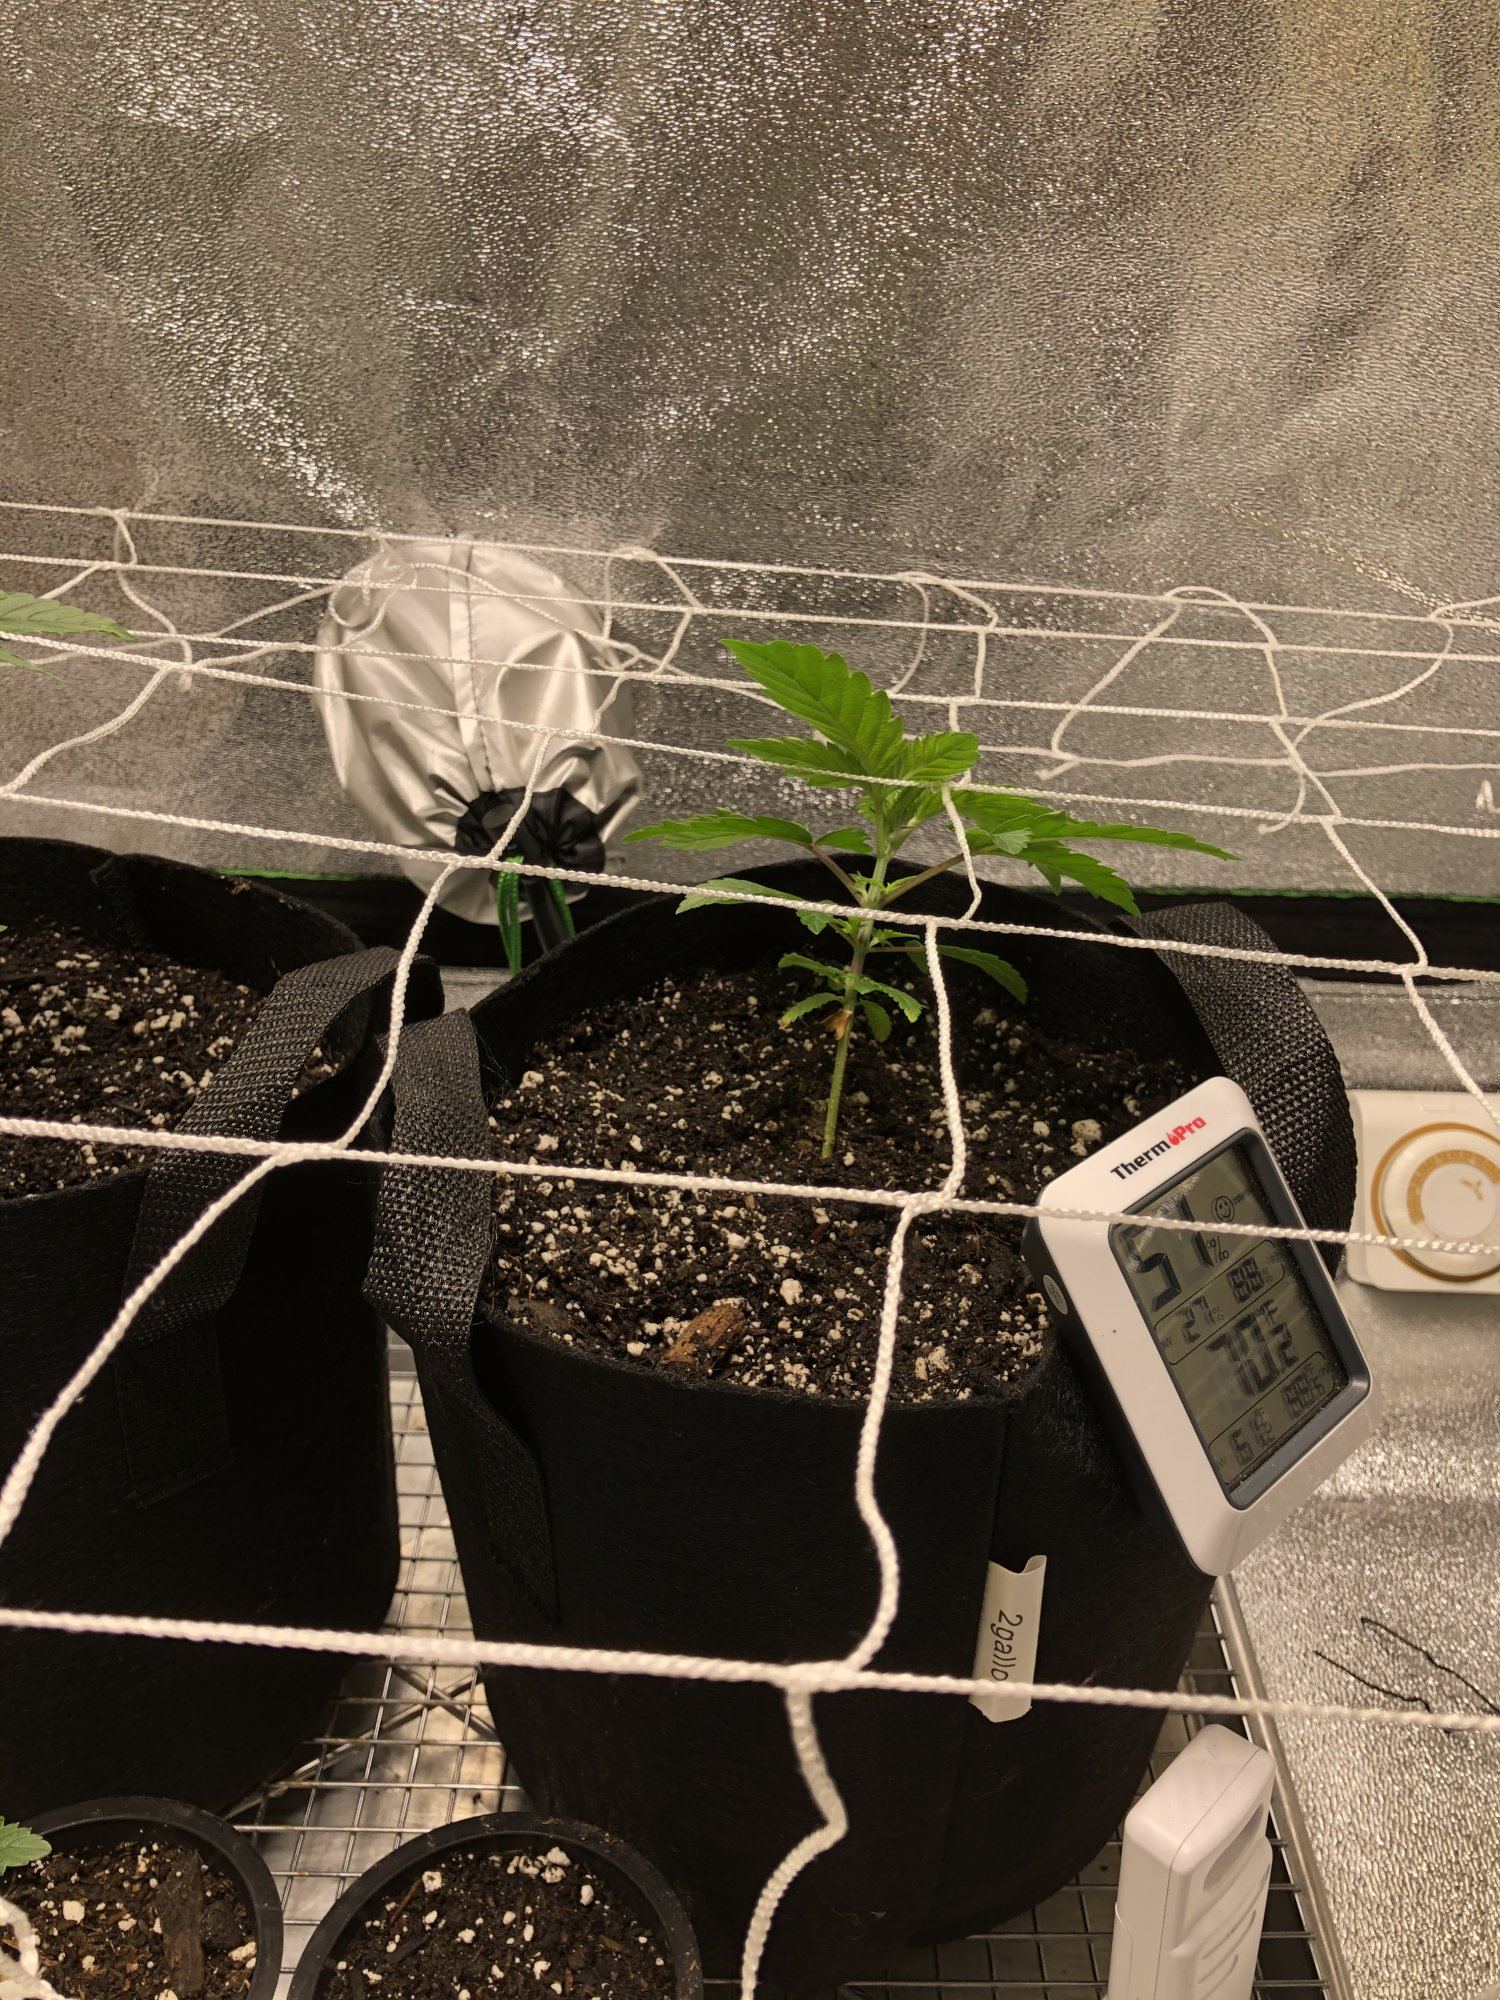 First scrog attempt how much am i fing up 3